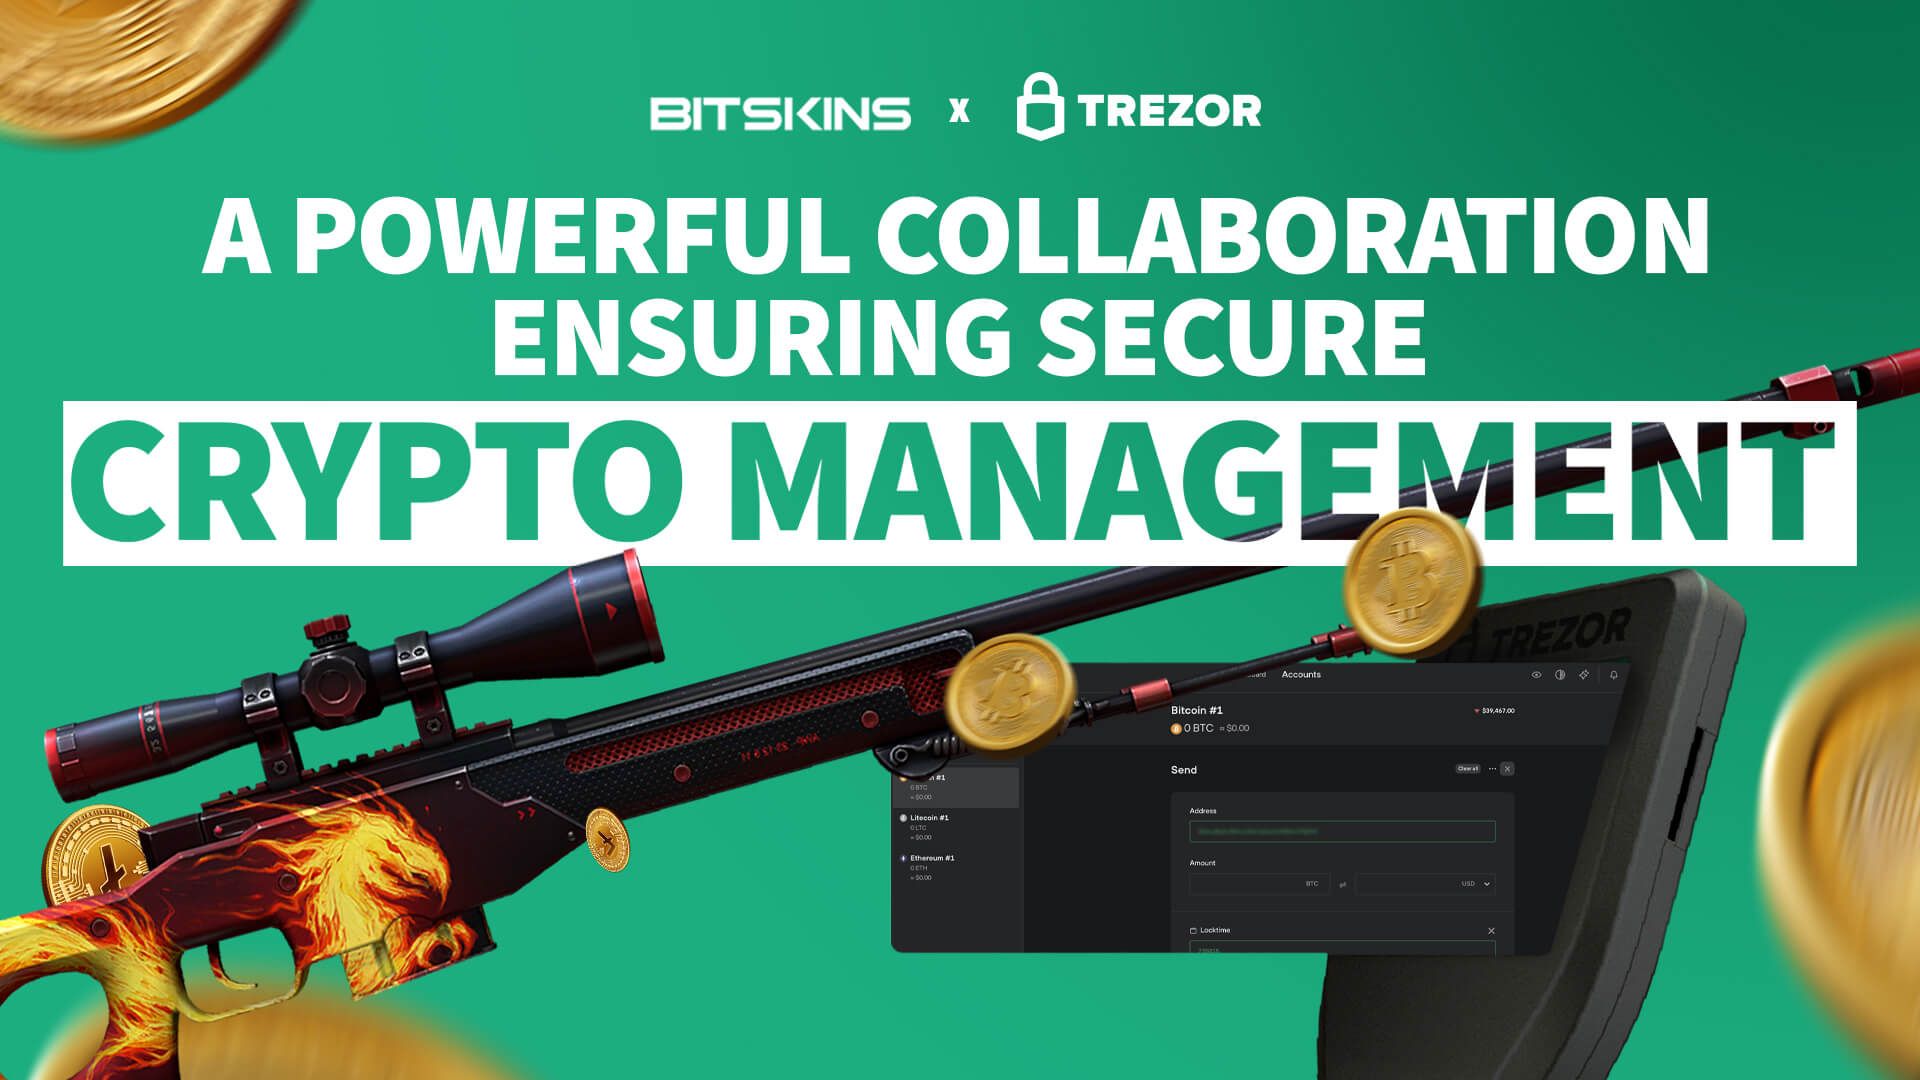 BitSkins and Trezor: A powerful collaboration ensuring secure crypto management